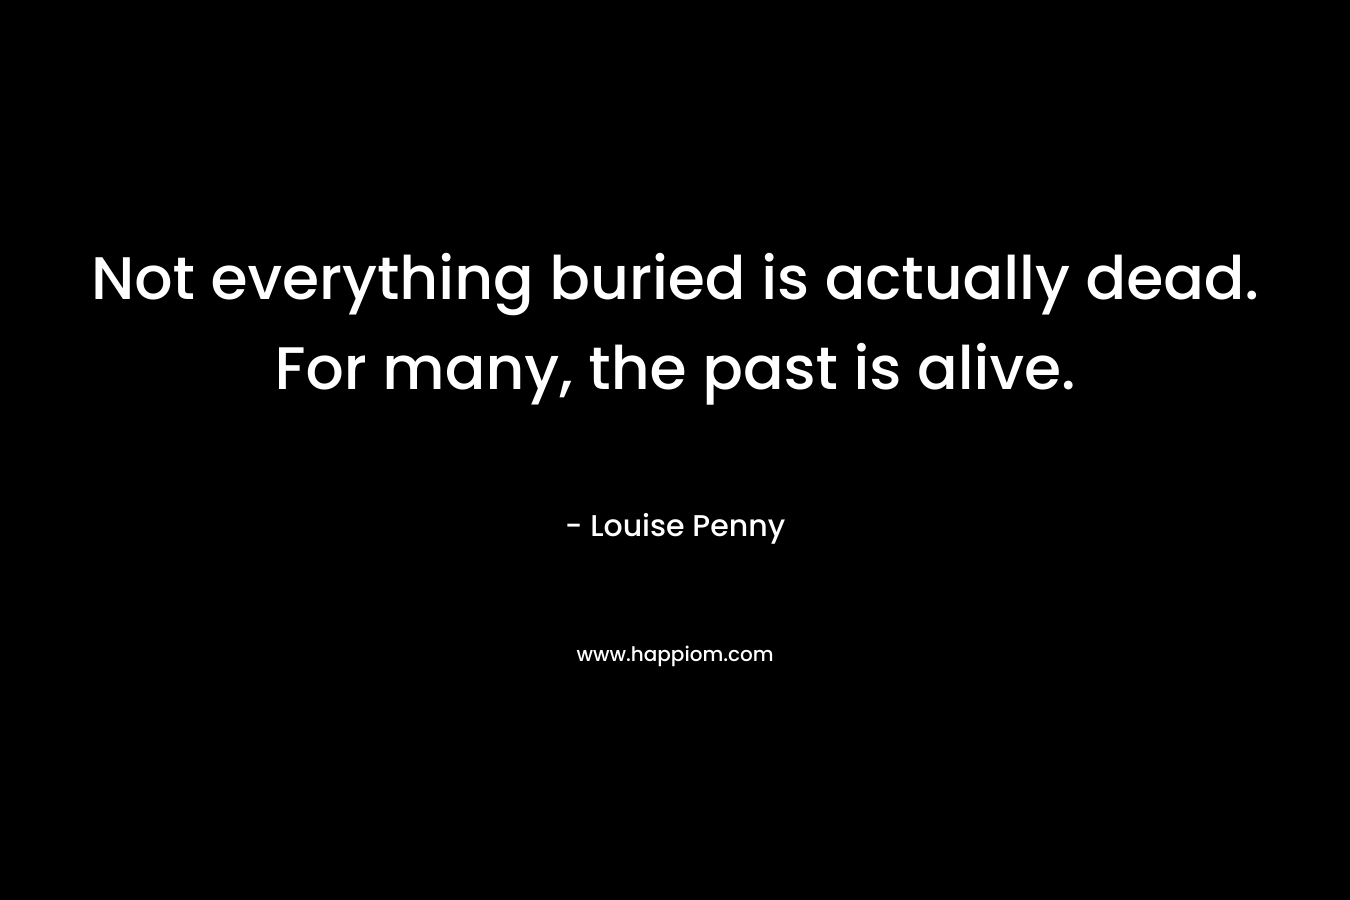 Not everything buried is actually dead. For many, the past is alive. – Louise Penny